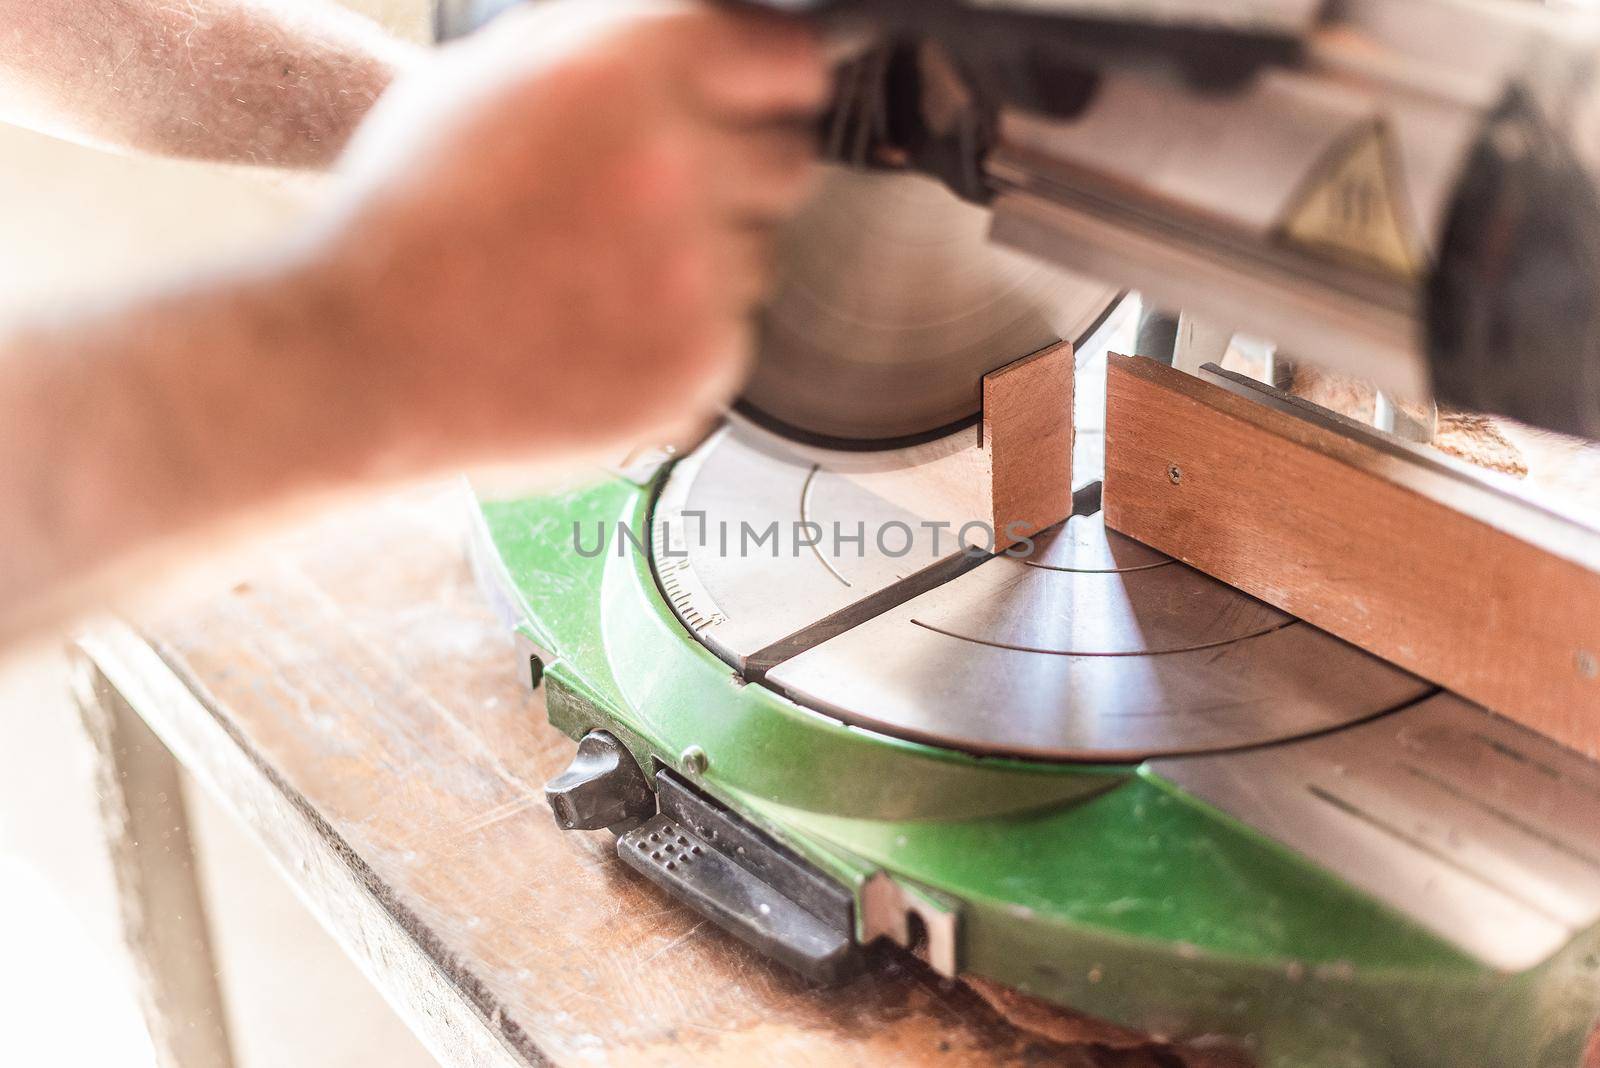 miter saw in motion, blurred hand in foreground by ivanmoreno